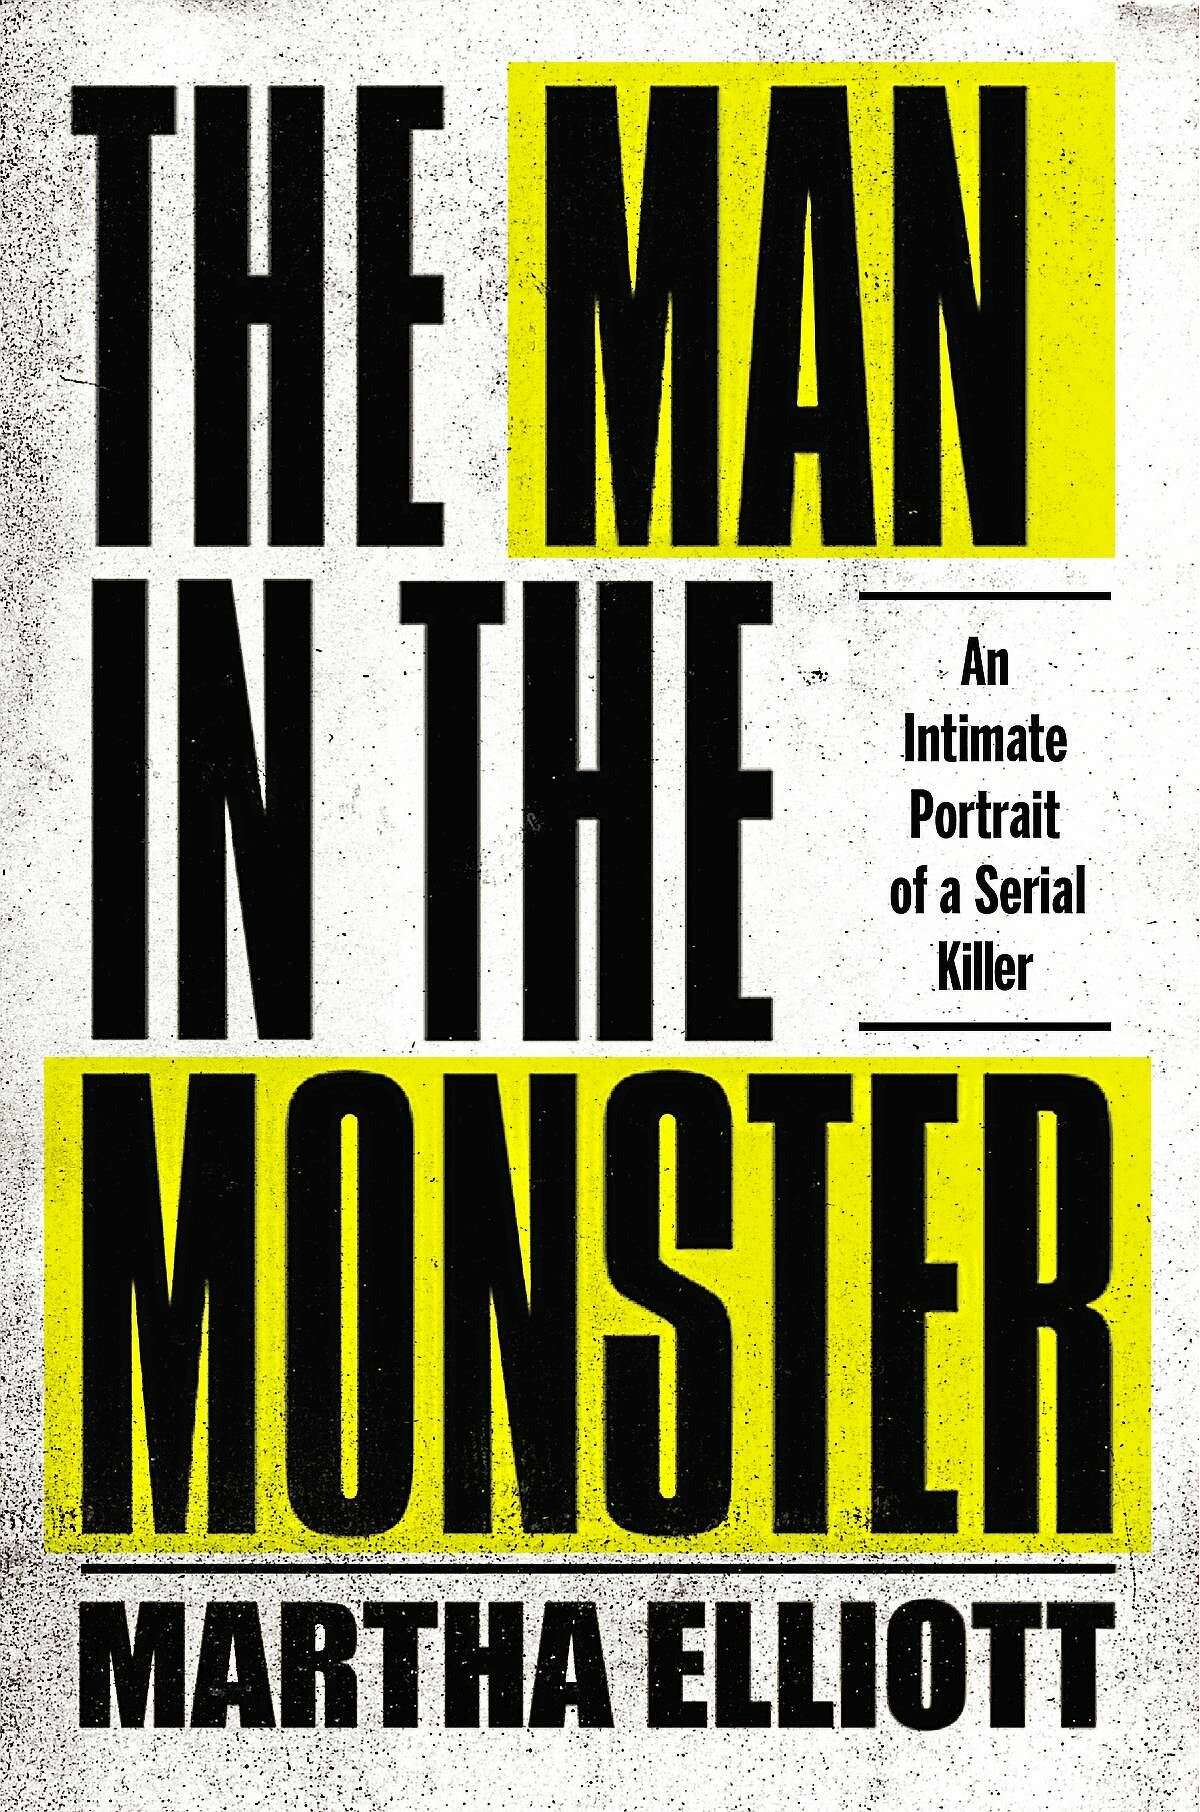 Book cover from the new rok by Martha Elliott, author of the new book “The Man in the Monster, an intimate portrait of a serial killer” by Penguin Press.